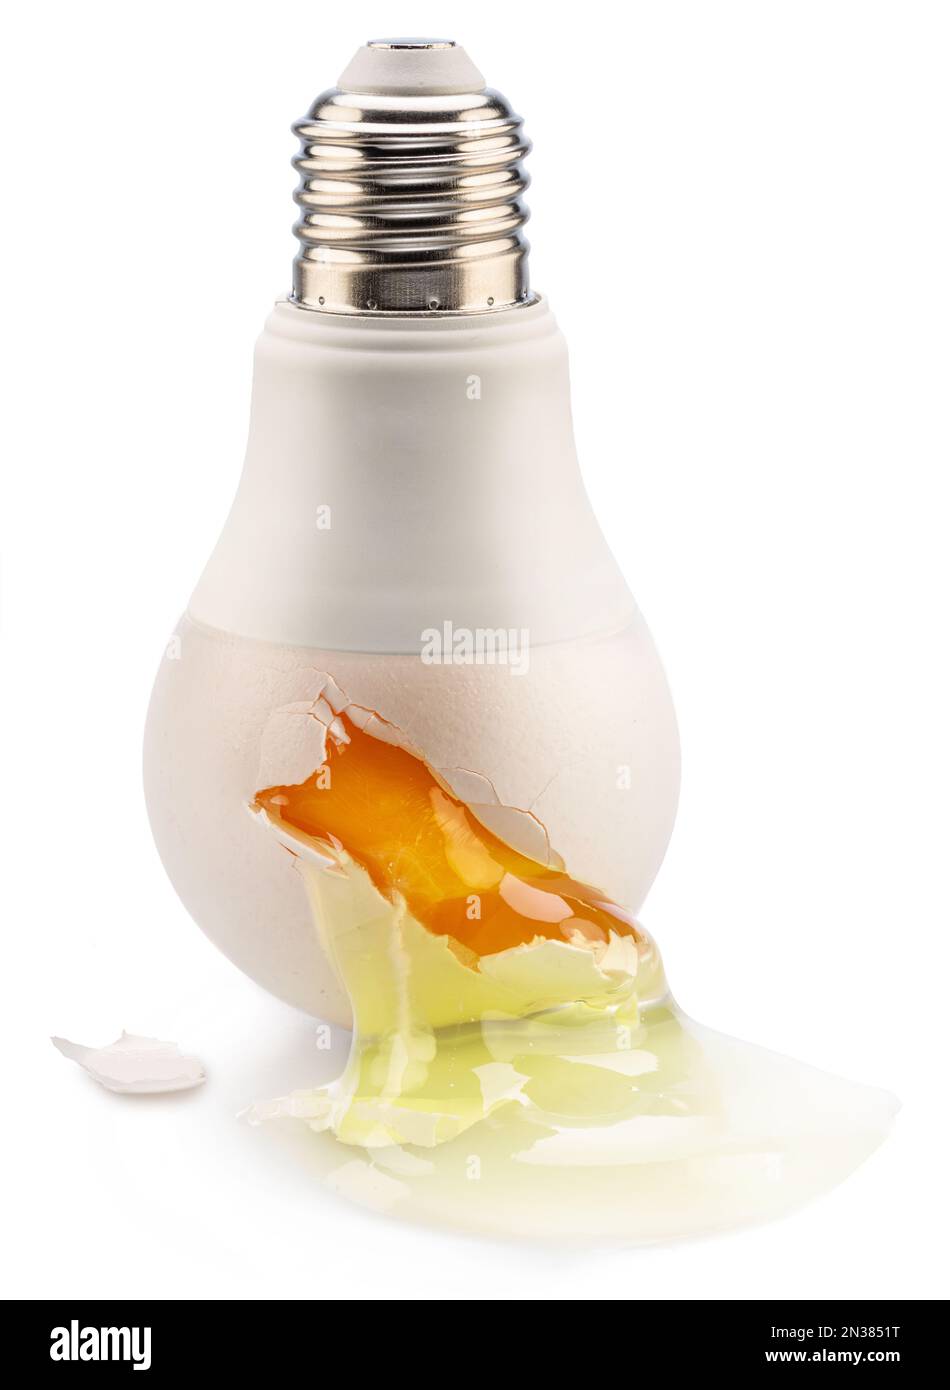 Egg yolk leaking from a light bulb crack - conceptual picture. Stock Photo